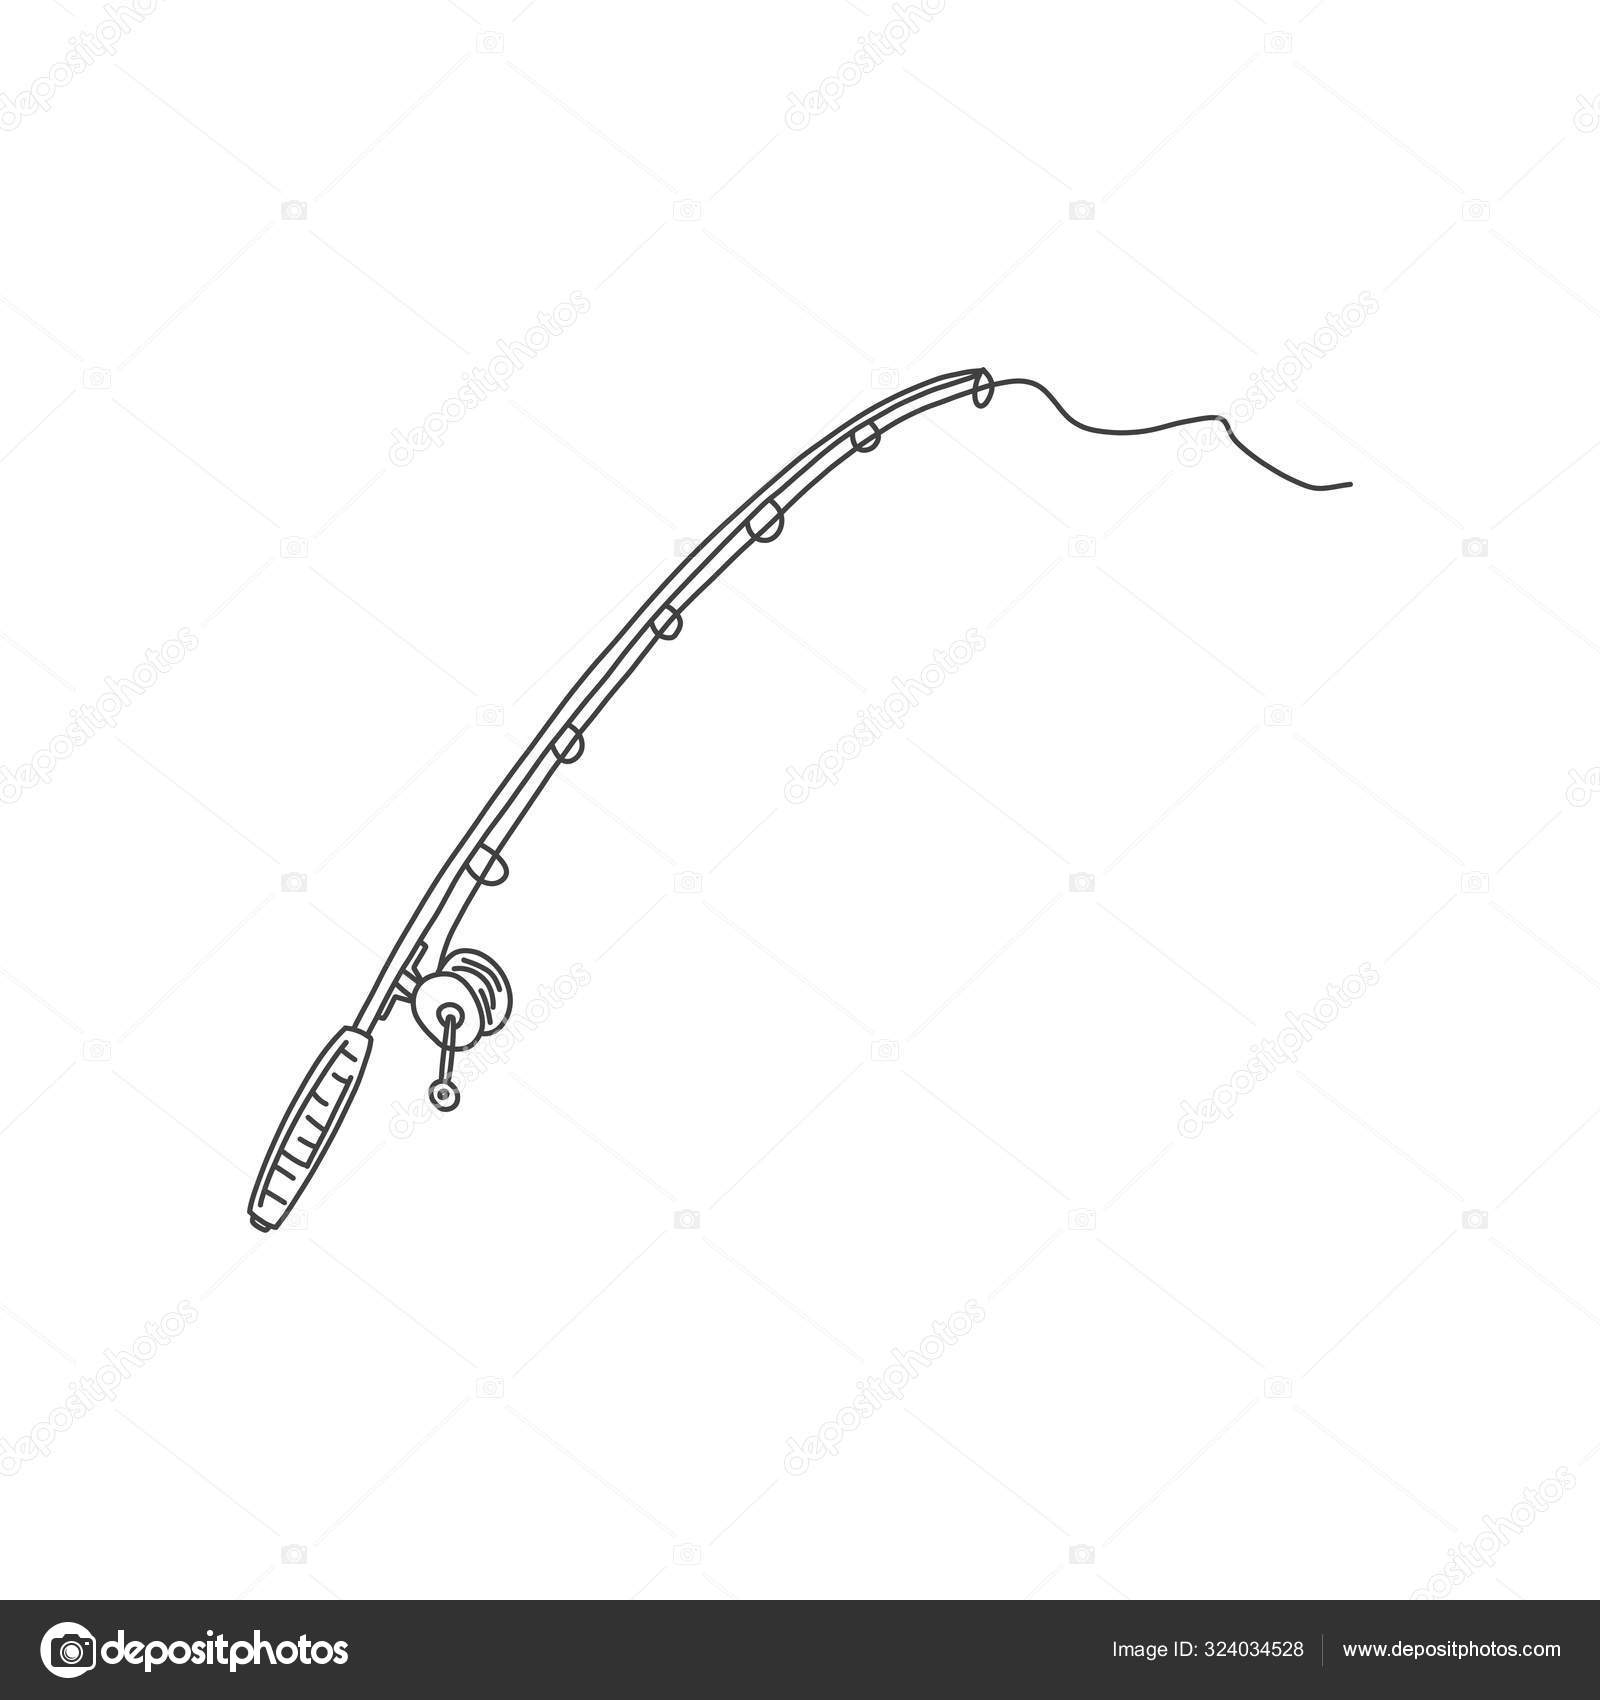 United fishing rod, sketch hand drawn fish art. Stock Vector by